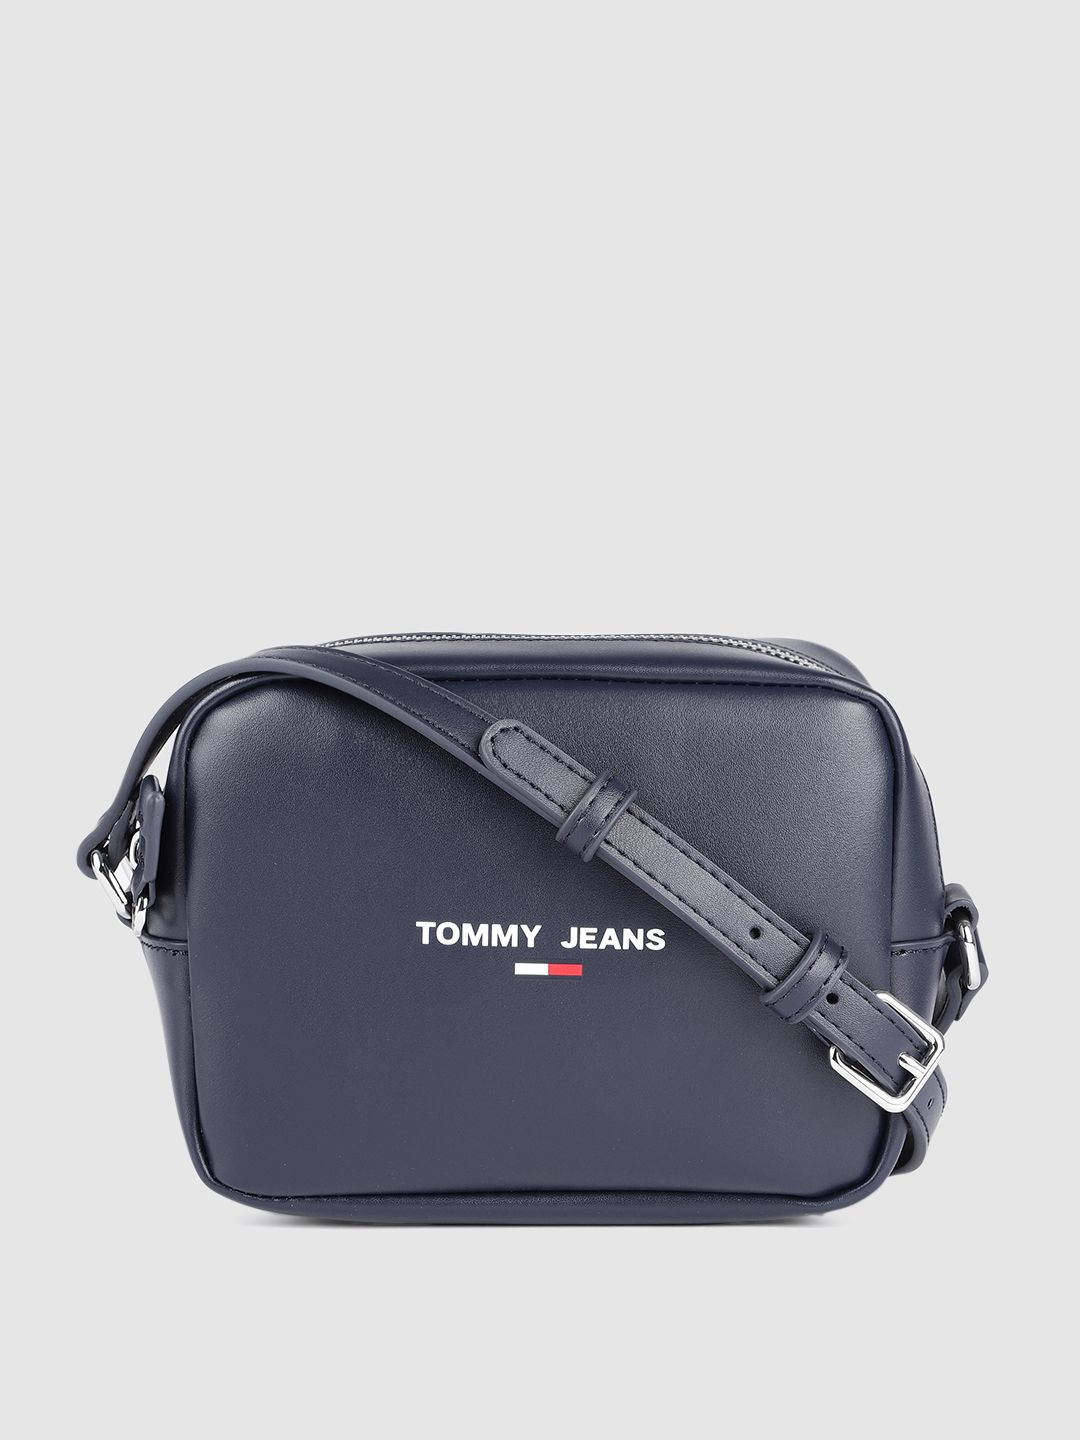 Tommy Hilfiger Navy Blue PU Structured Sling Bag Price in India